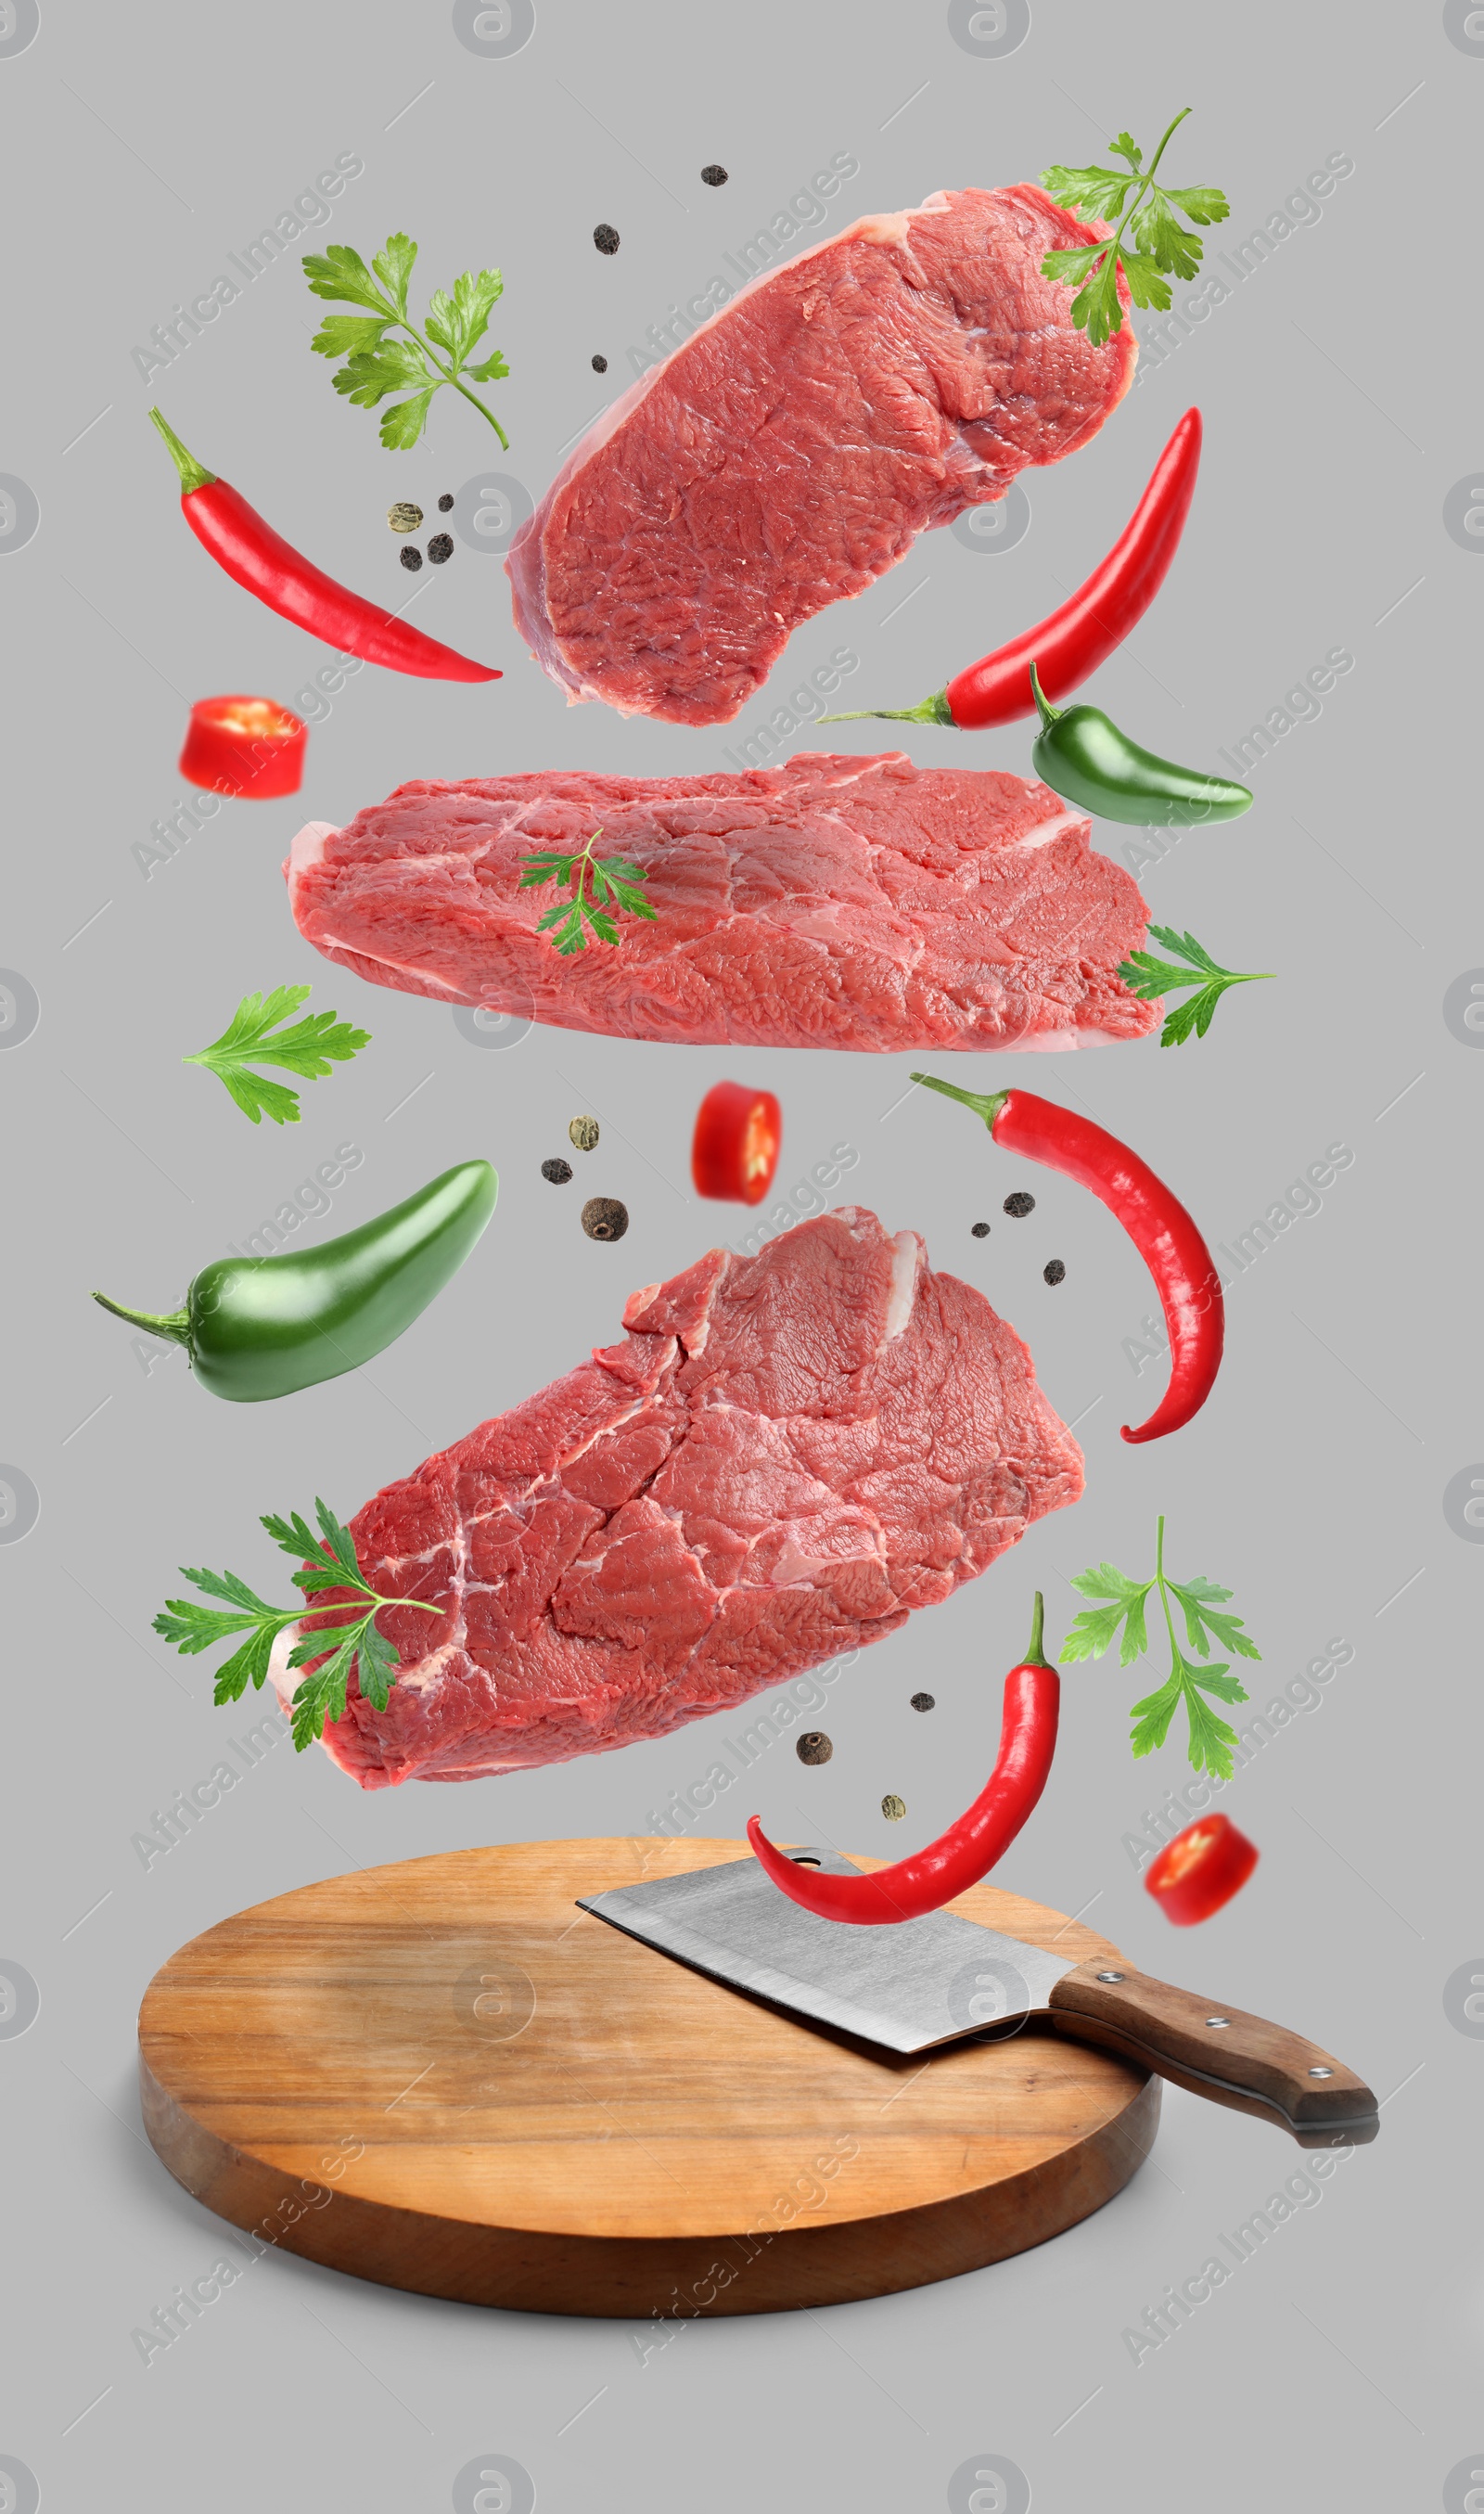 Image of Beef meat and different spices falling on grey background